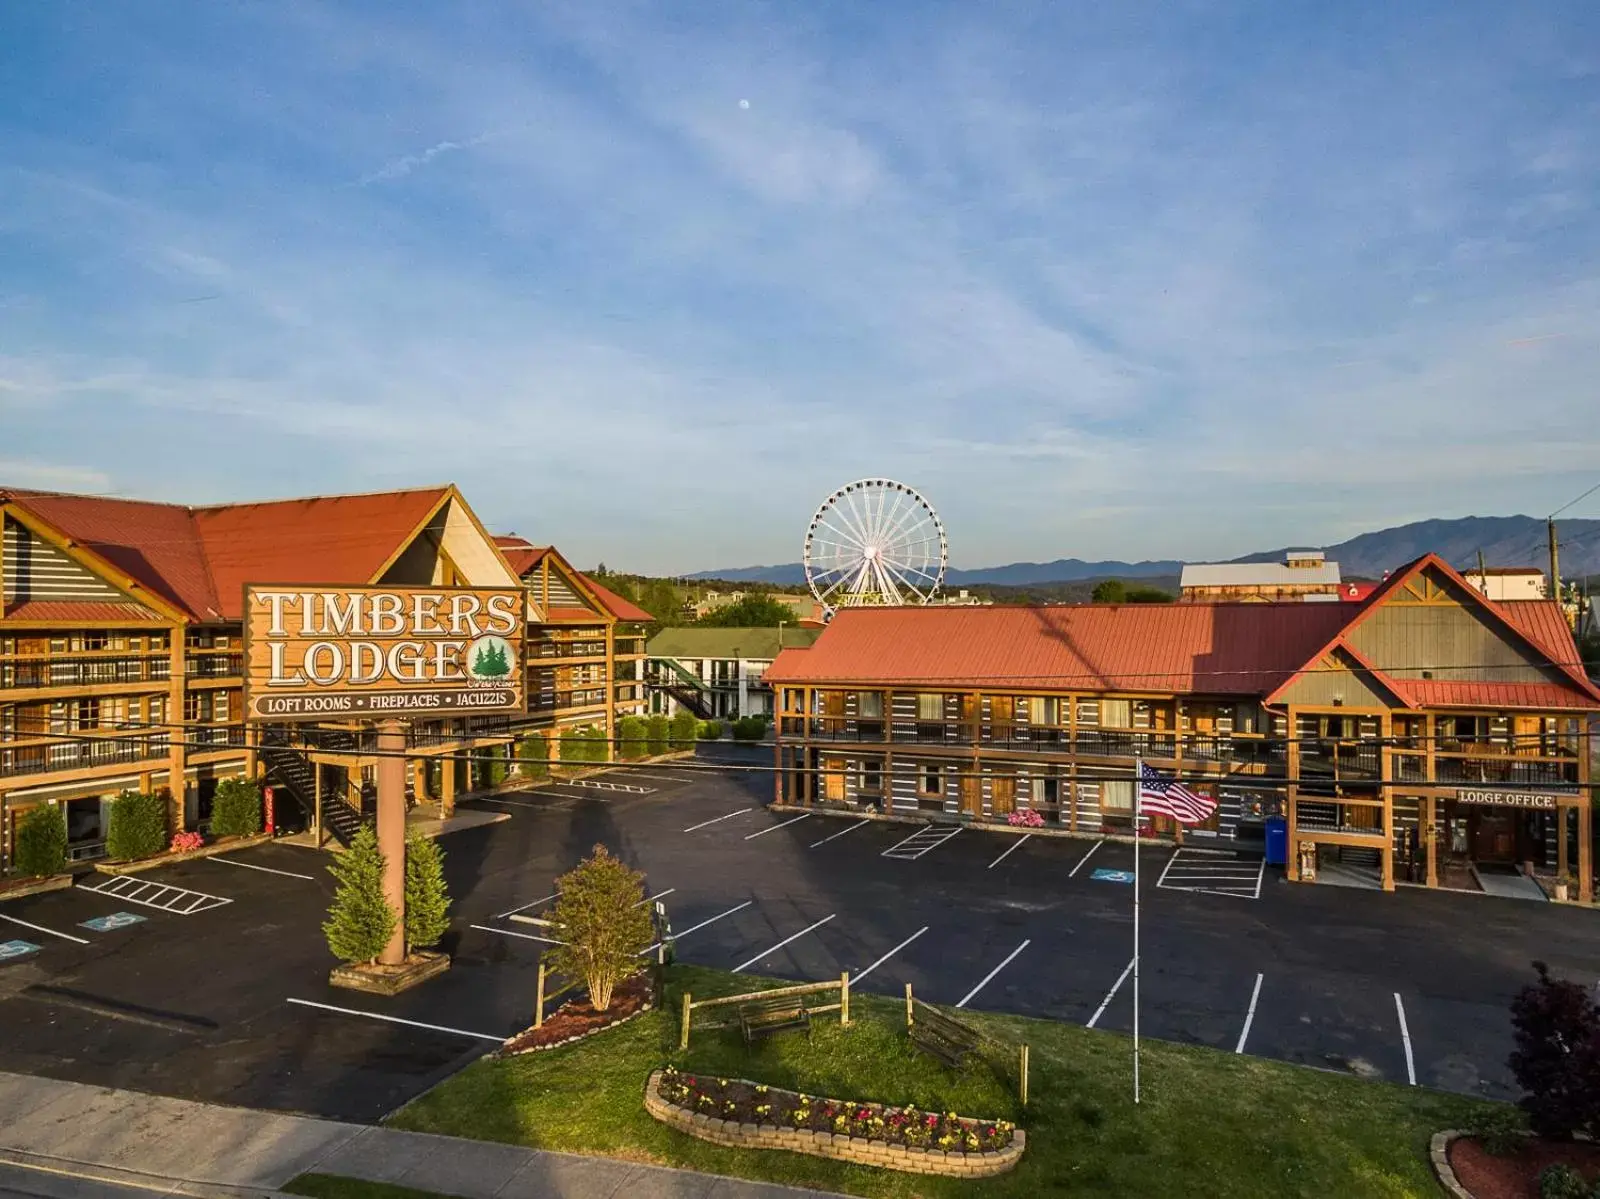 Property building in Timbers Lodge